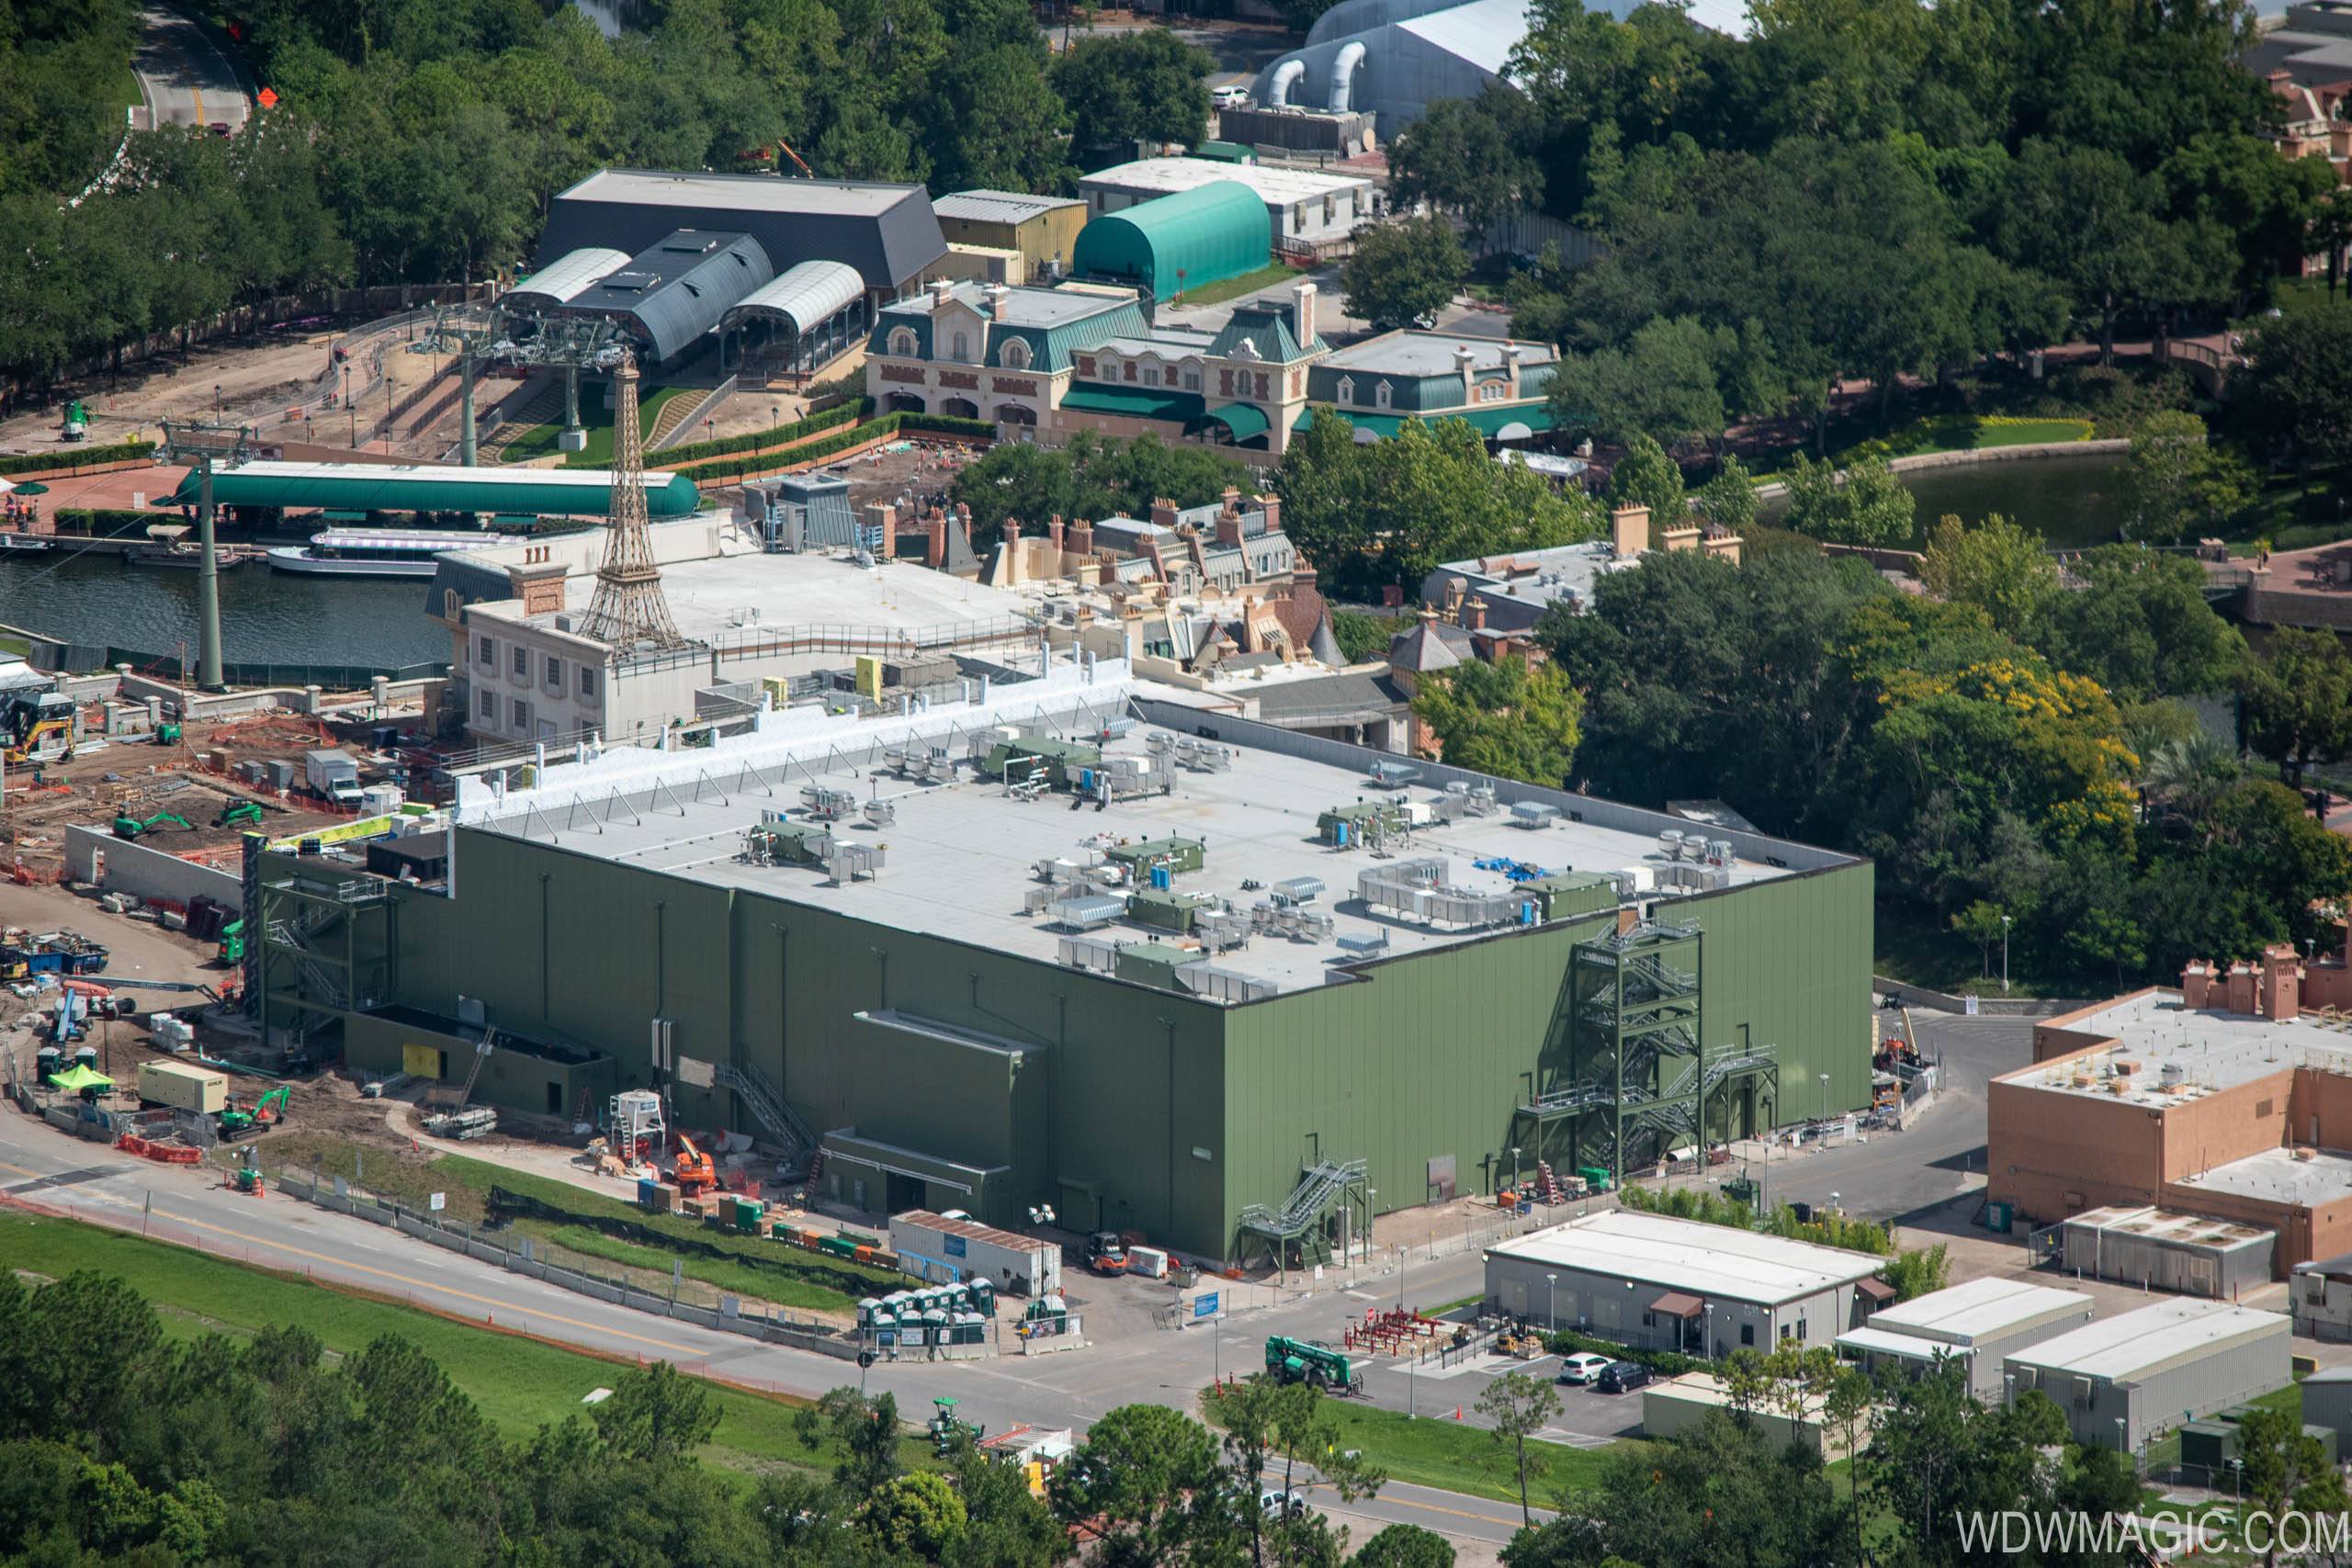 PHOTOS - Remy's Ratatouille Adventure construction from the air